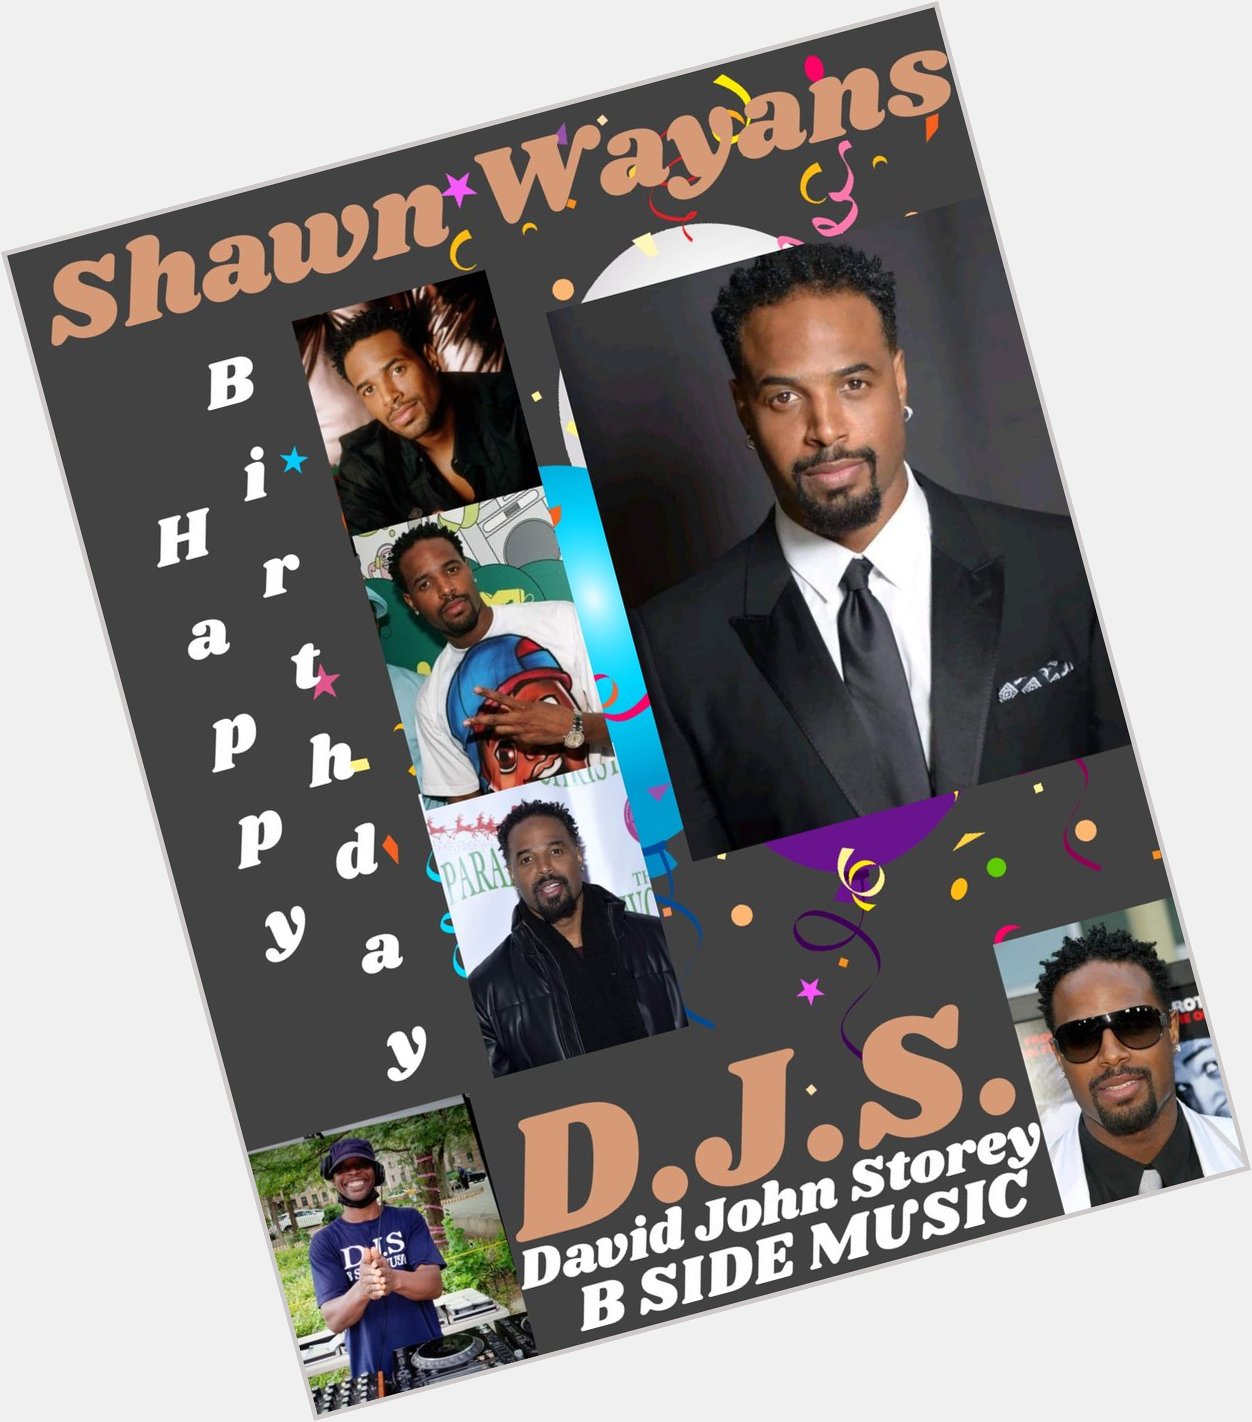 I(D.J.S.)\"B SIDE NY\" taking time to say Happy Belated Birthday to Actor/Comedian/Writer/Producer: \"SHAWN WAYANS\"!!!! 